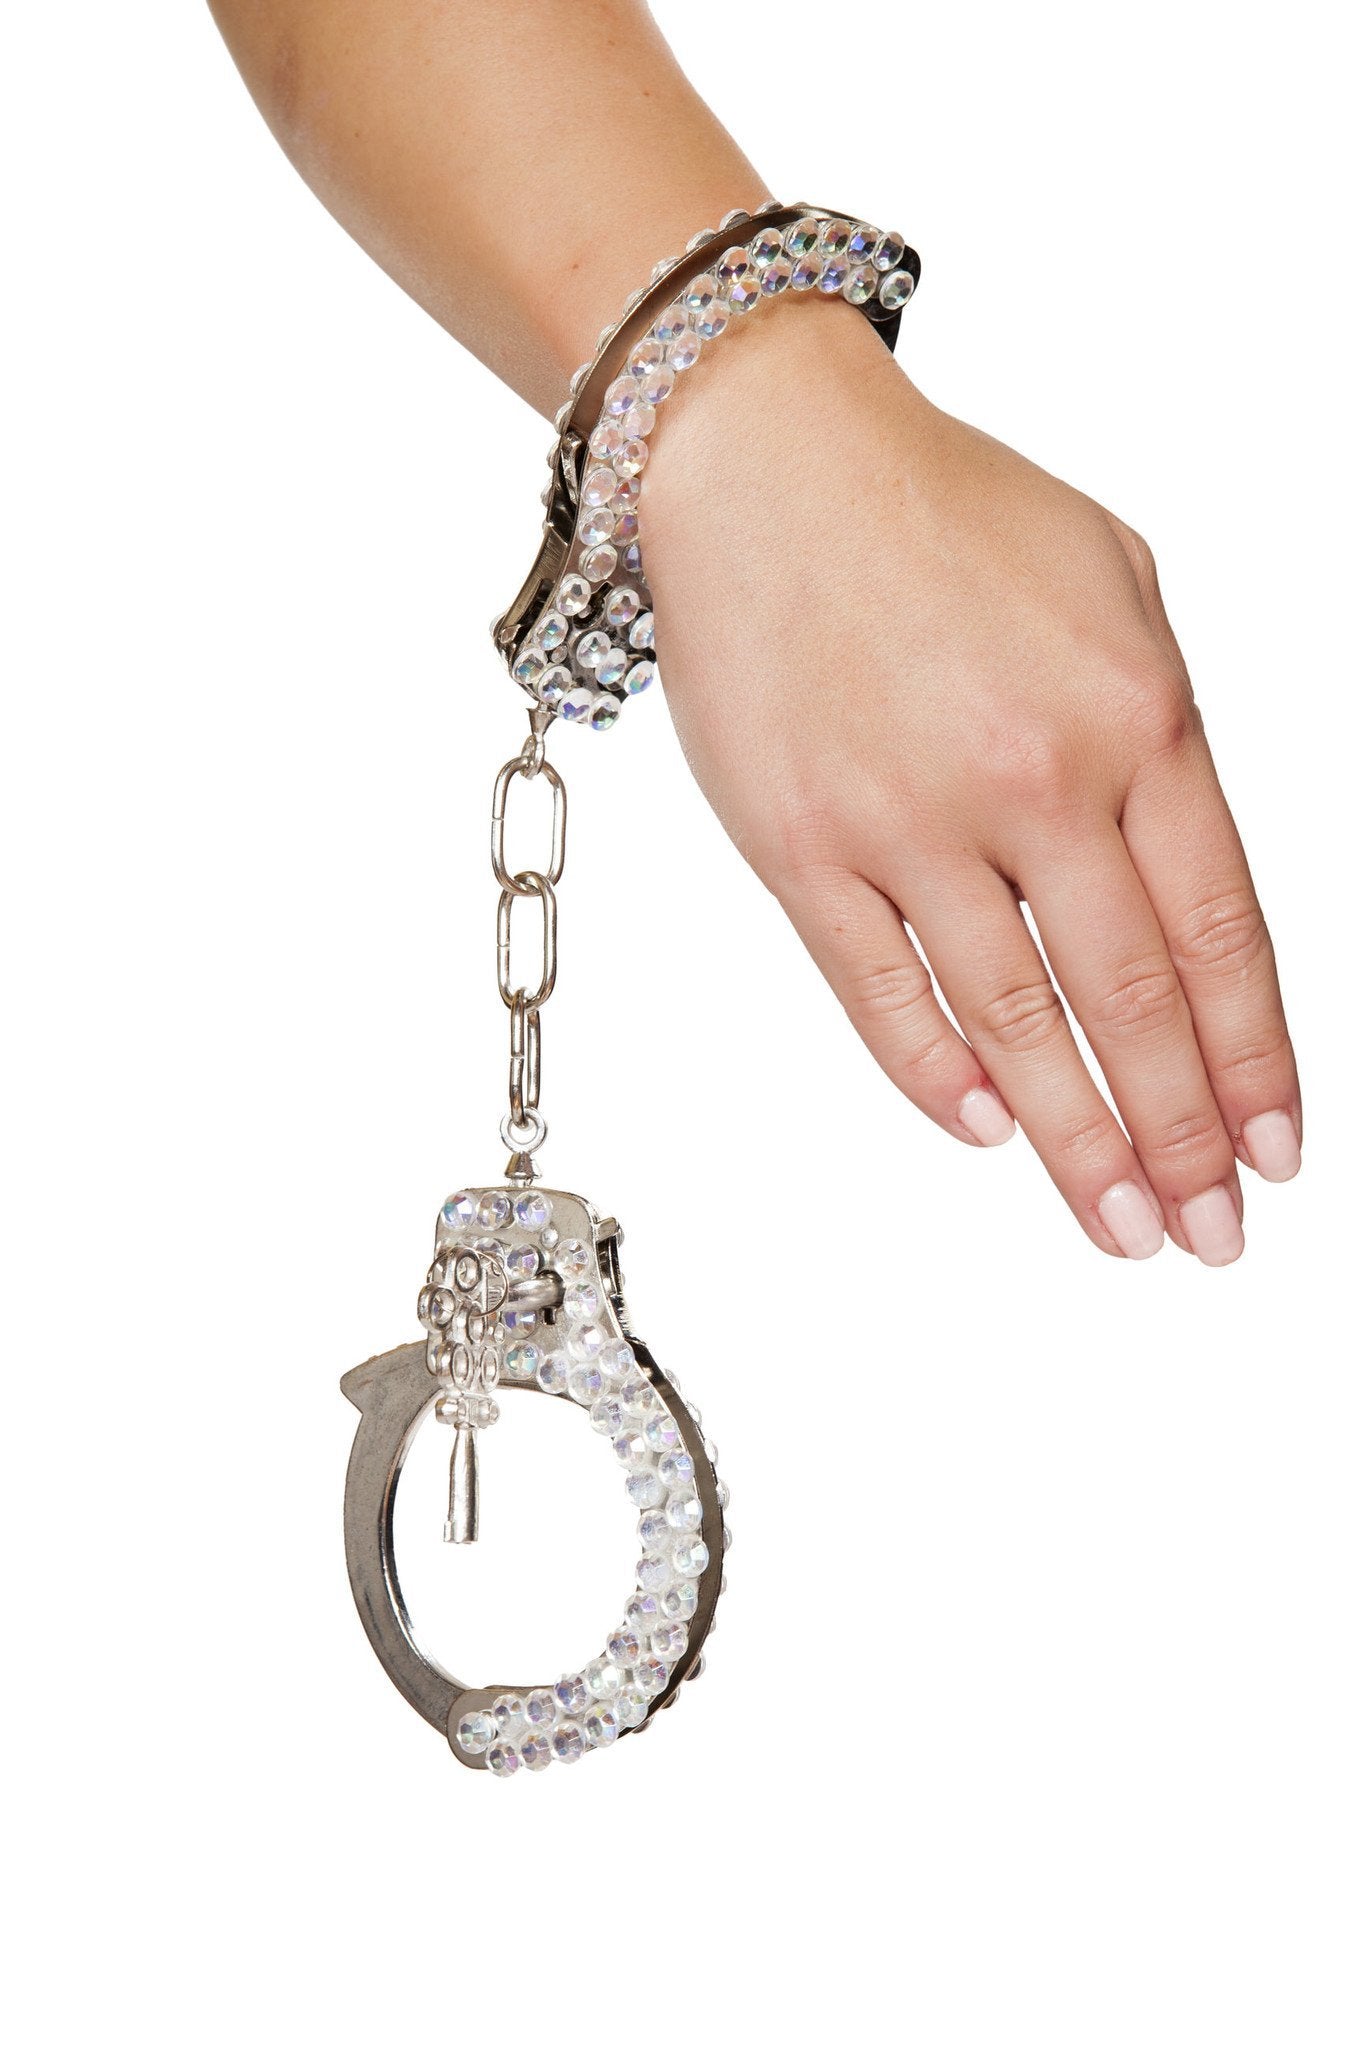 Buy Silver Handcuffs with Rhinestones from RomaRetailShop for 14.50 with Same Day Shipping Designed by Roma Costume CU102-AS-O/S